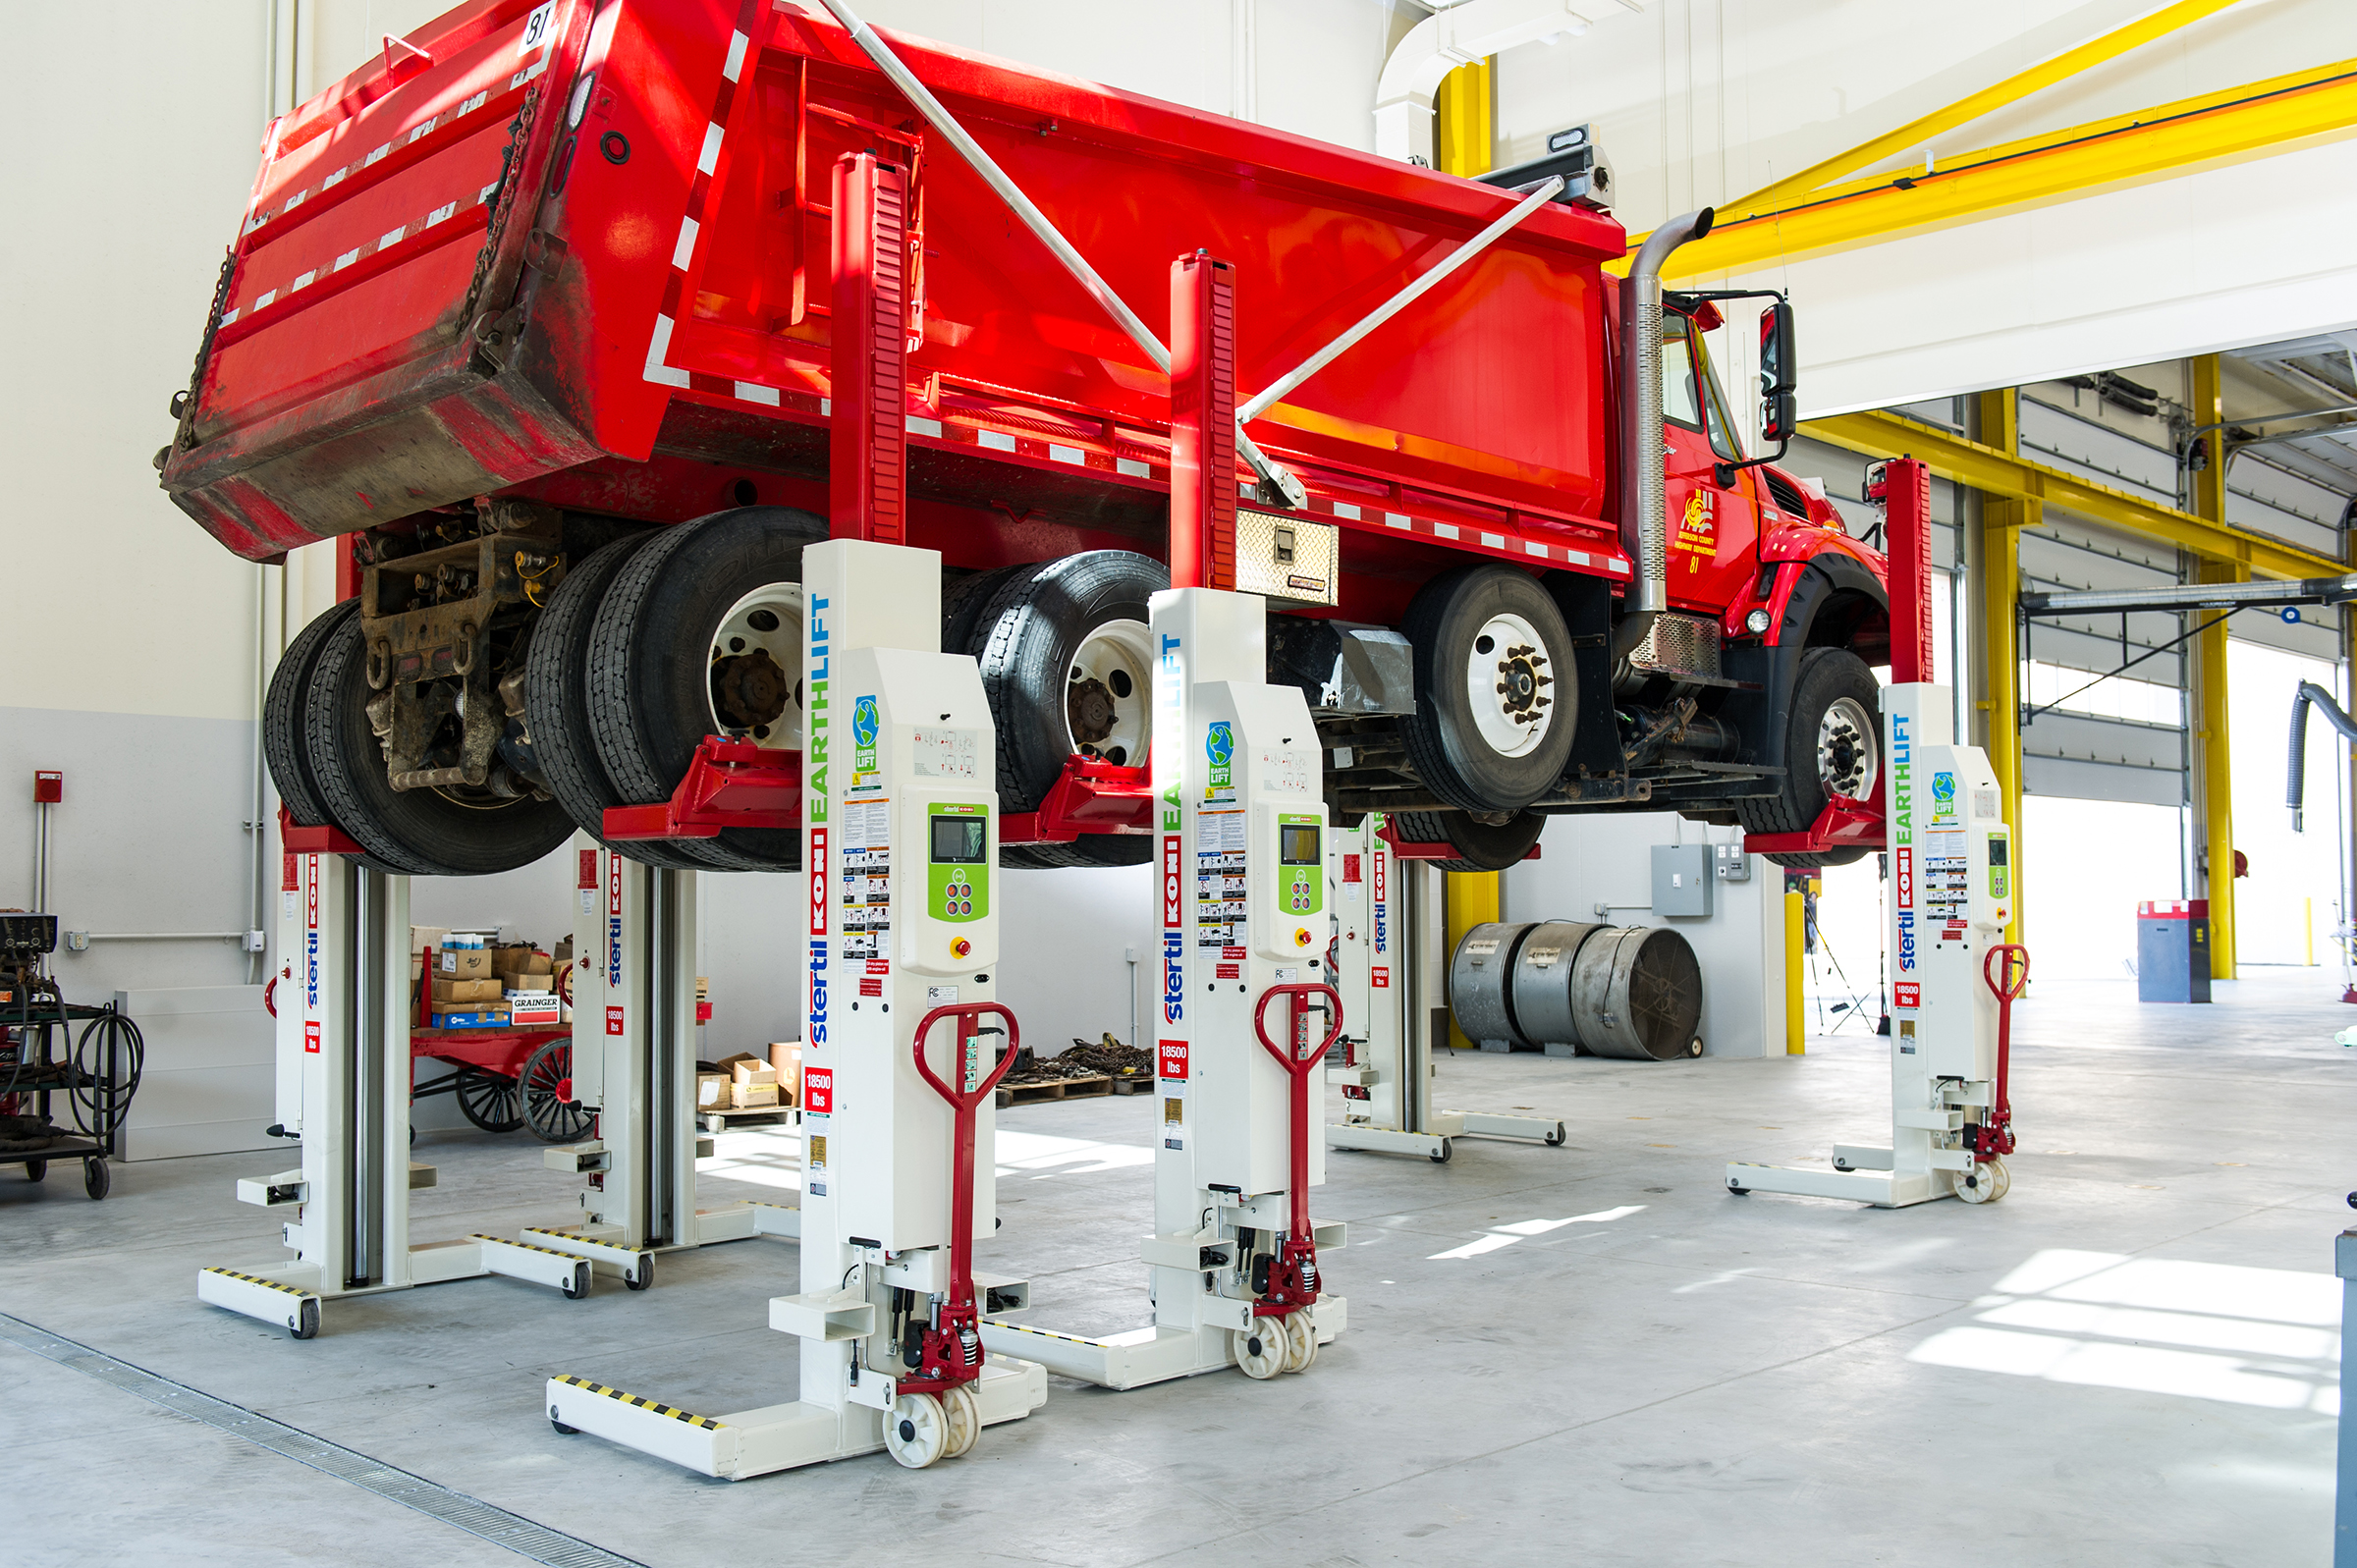 Stertil-Koni's EARTHLIFT is made from 98% recyclable materials and its closed hydraulic system contains 100% recyclable bio-degradable fluid and batteries